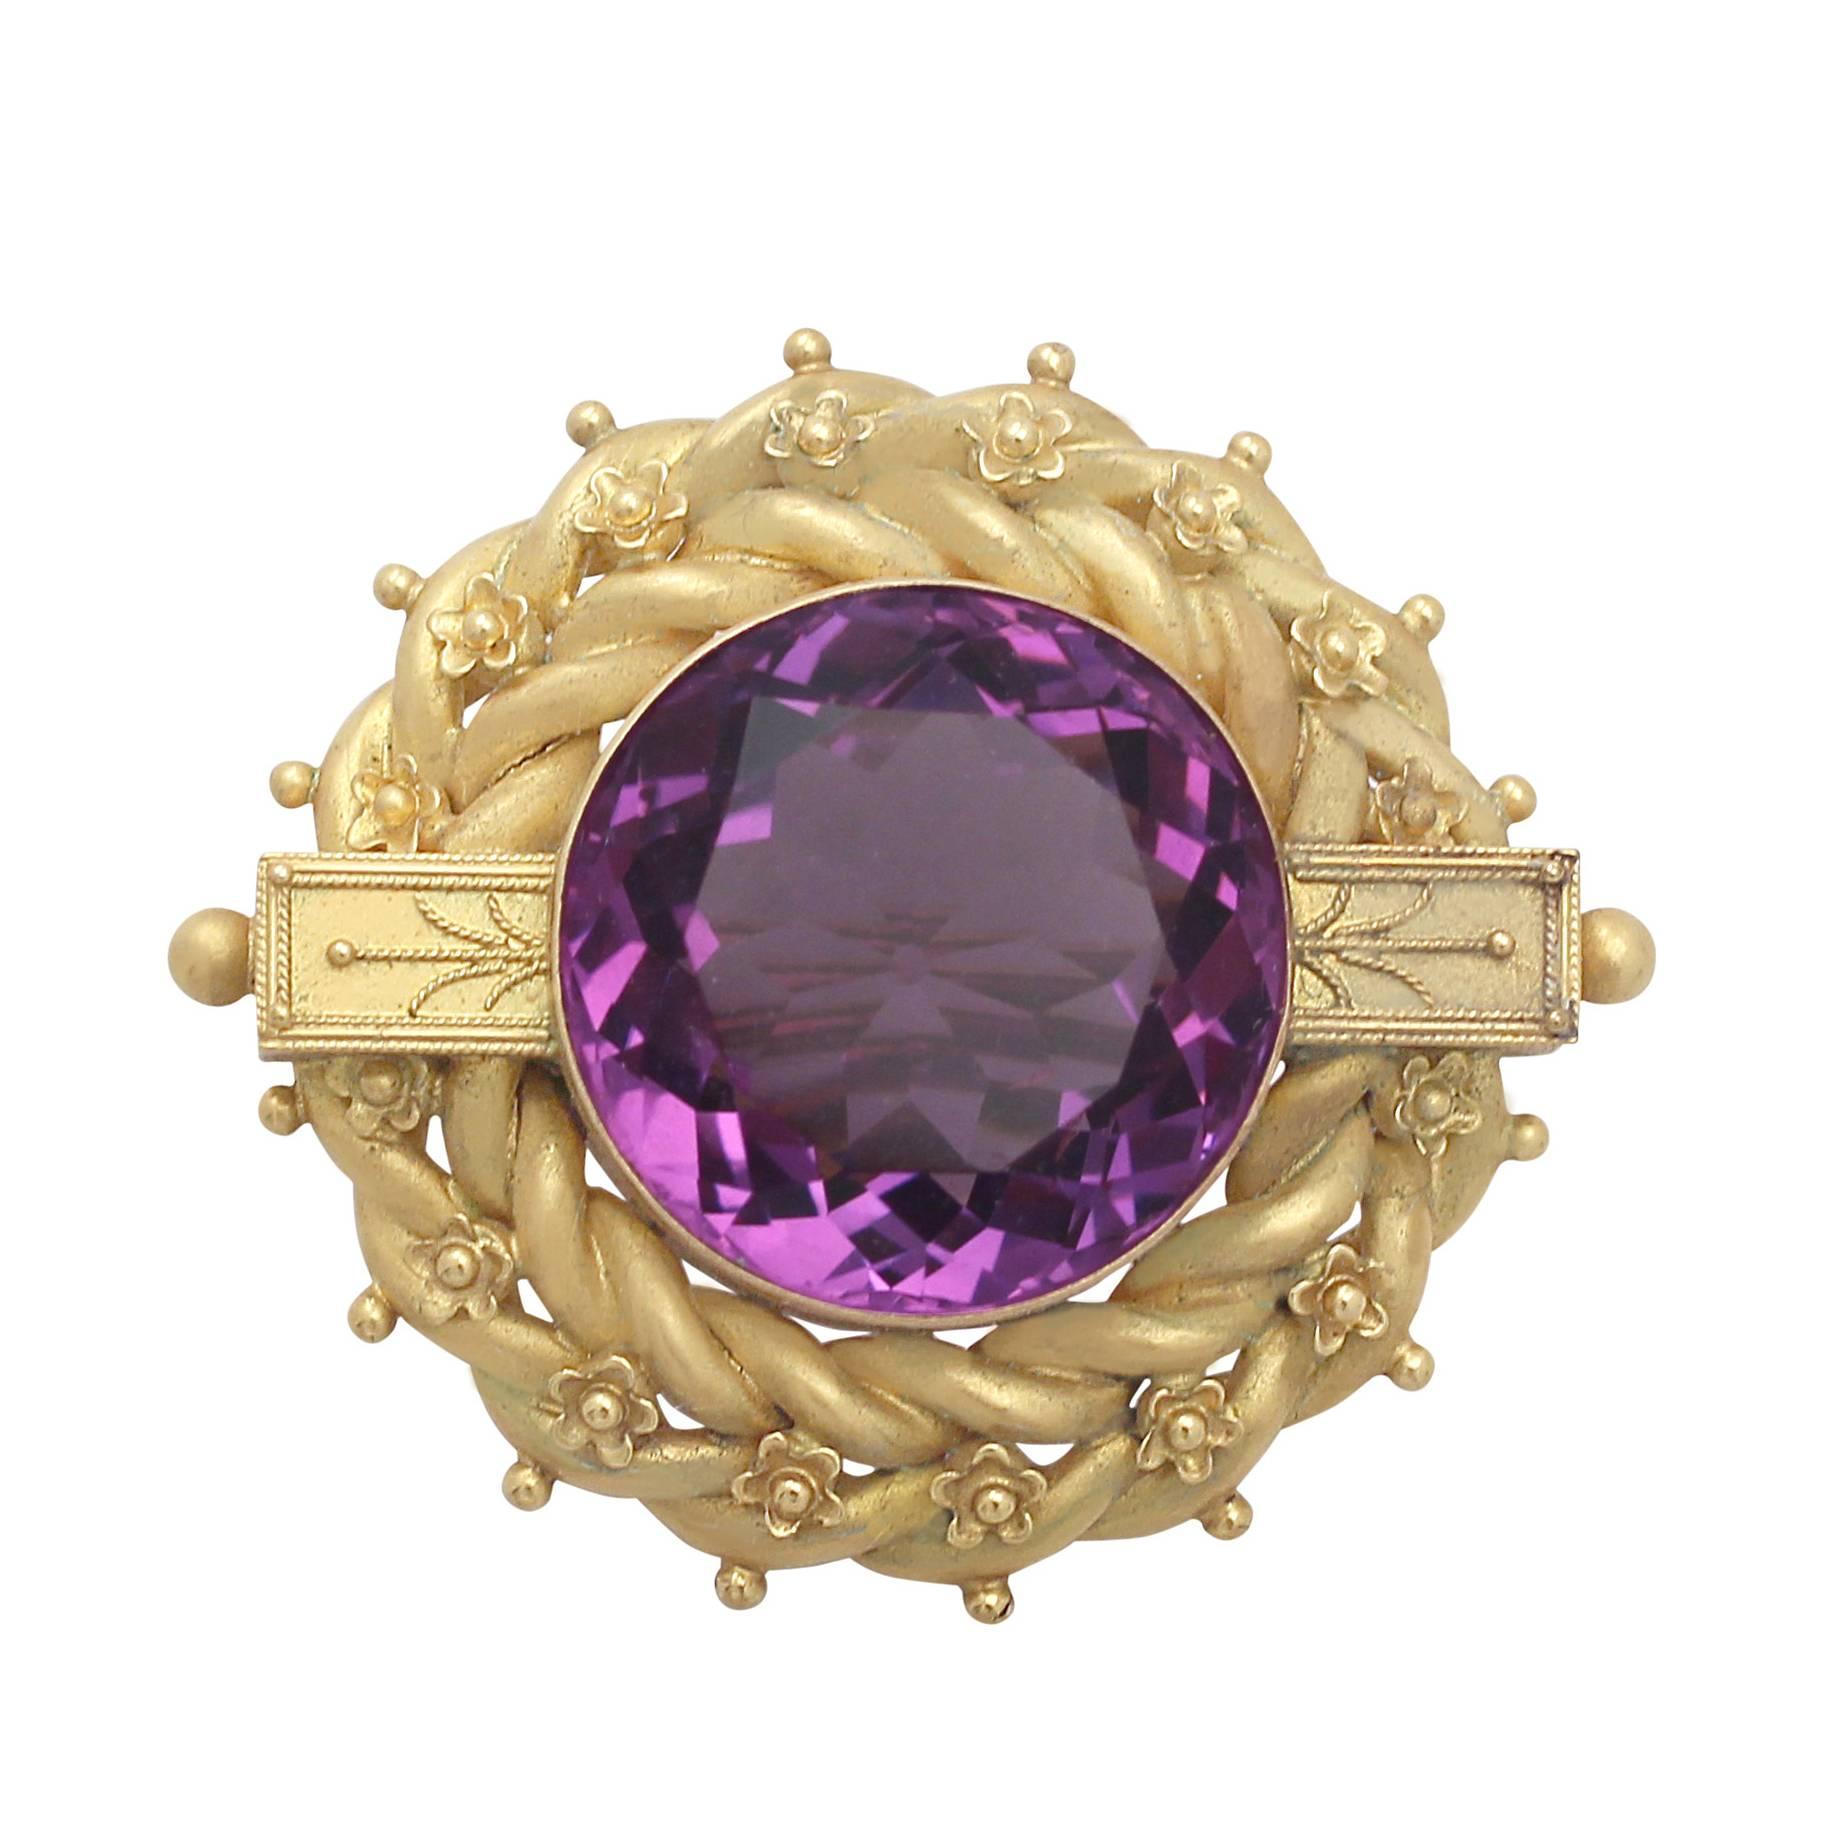 18.91Ct Amethyst and 20k Yellow Gold Brooch - Antique Victorian